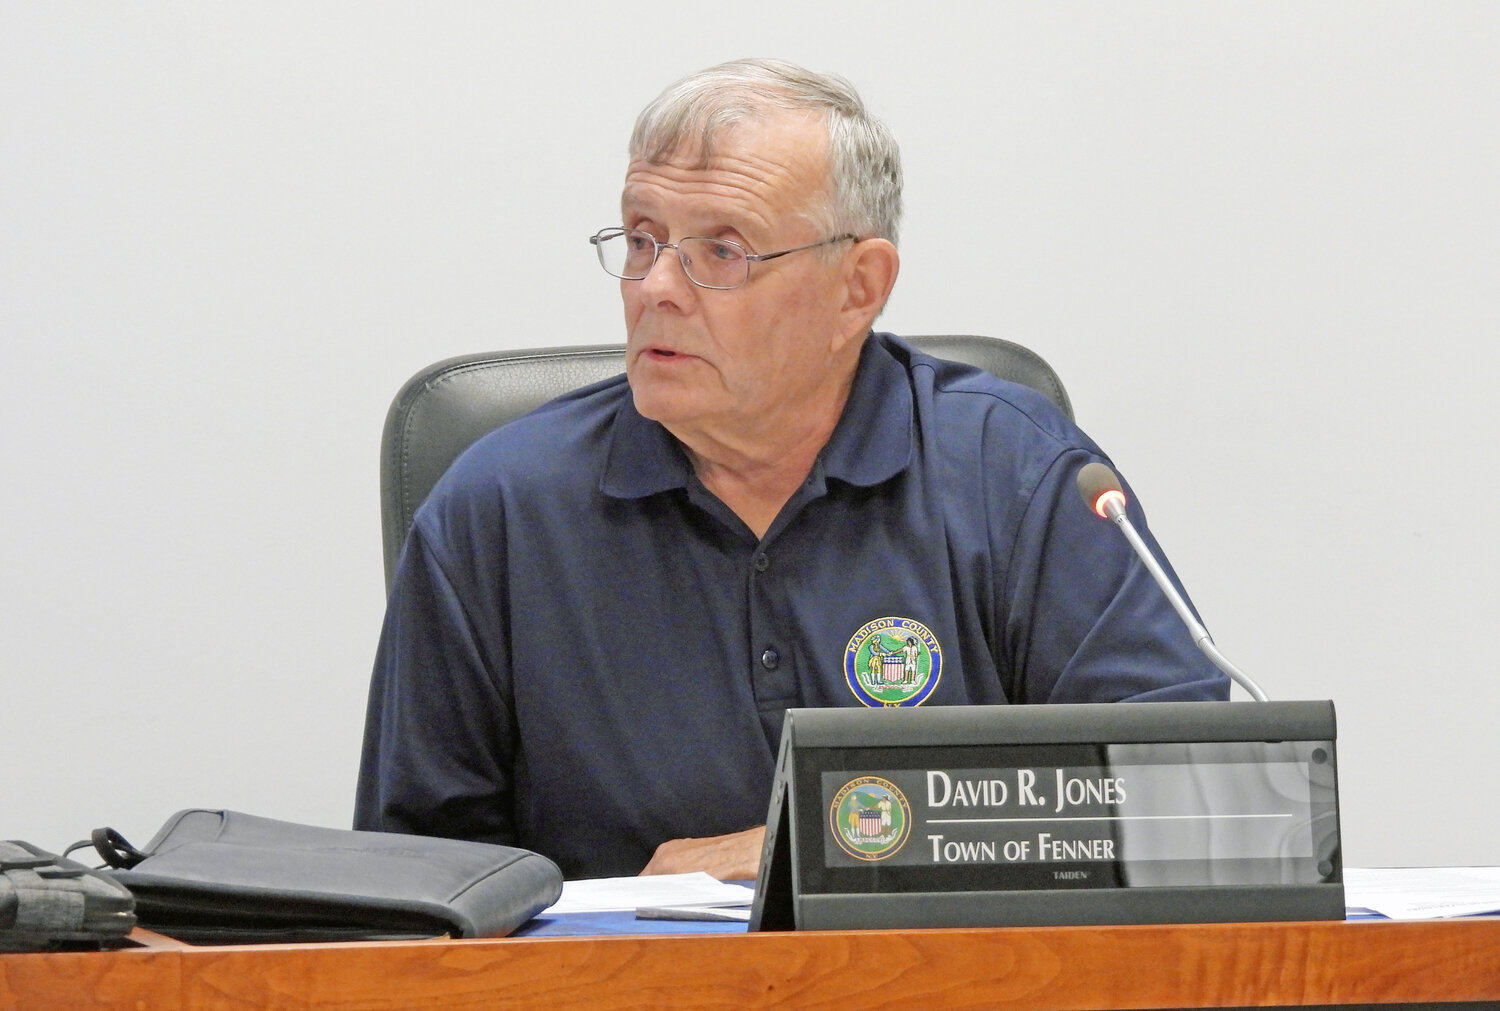 The Madison County Board of Supervisors meet for its monthly meeting on Tuesday, May 9. Fenner Supervisor David Jones speaks at the meeting, advocating for prime farmland to not go to solar and wind farms.